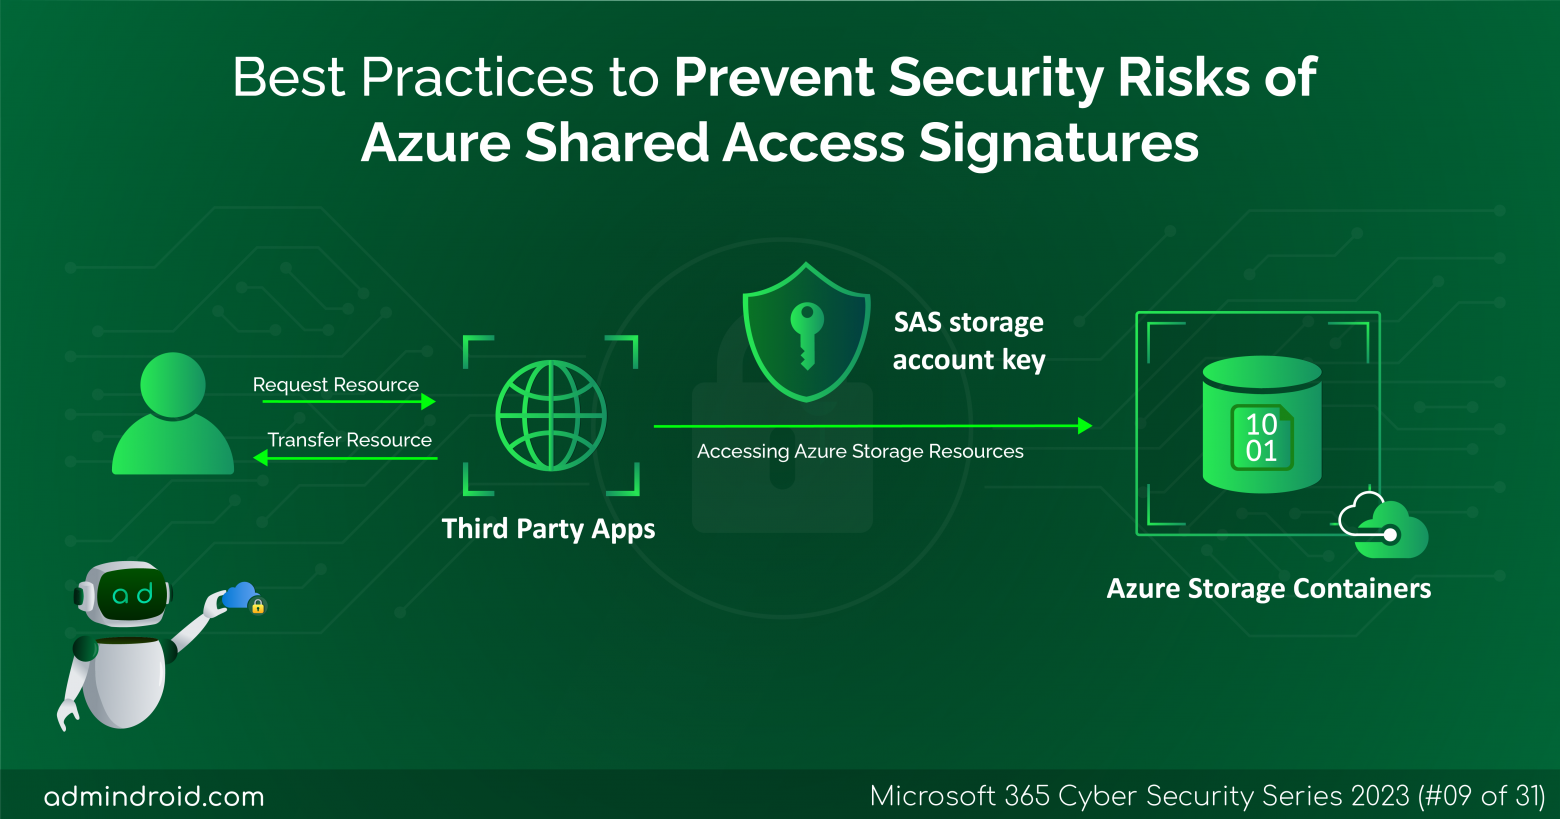 Best Practices to Prevent Security Risks of Azure Shared Access Signatures